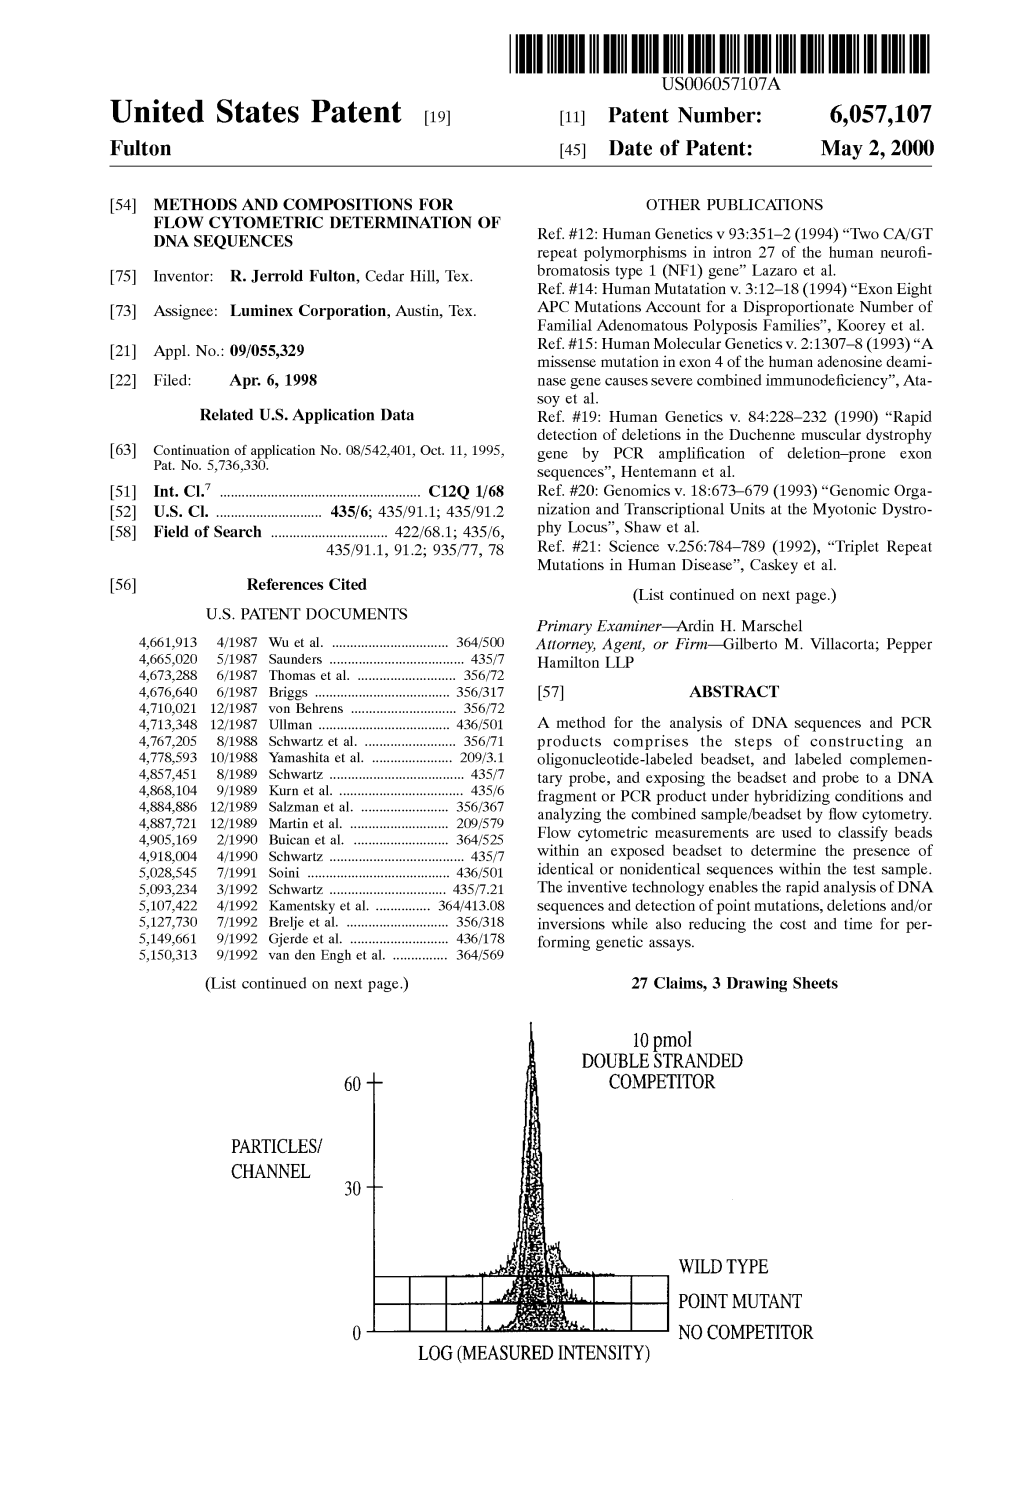 United States Patent (19) 11 Patent Number: 6,057,107 Fulton (45) Date of Patent: May 2, 2000